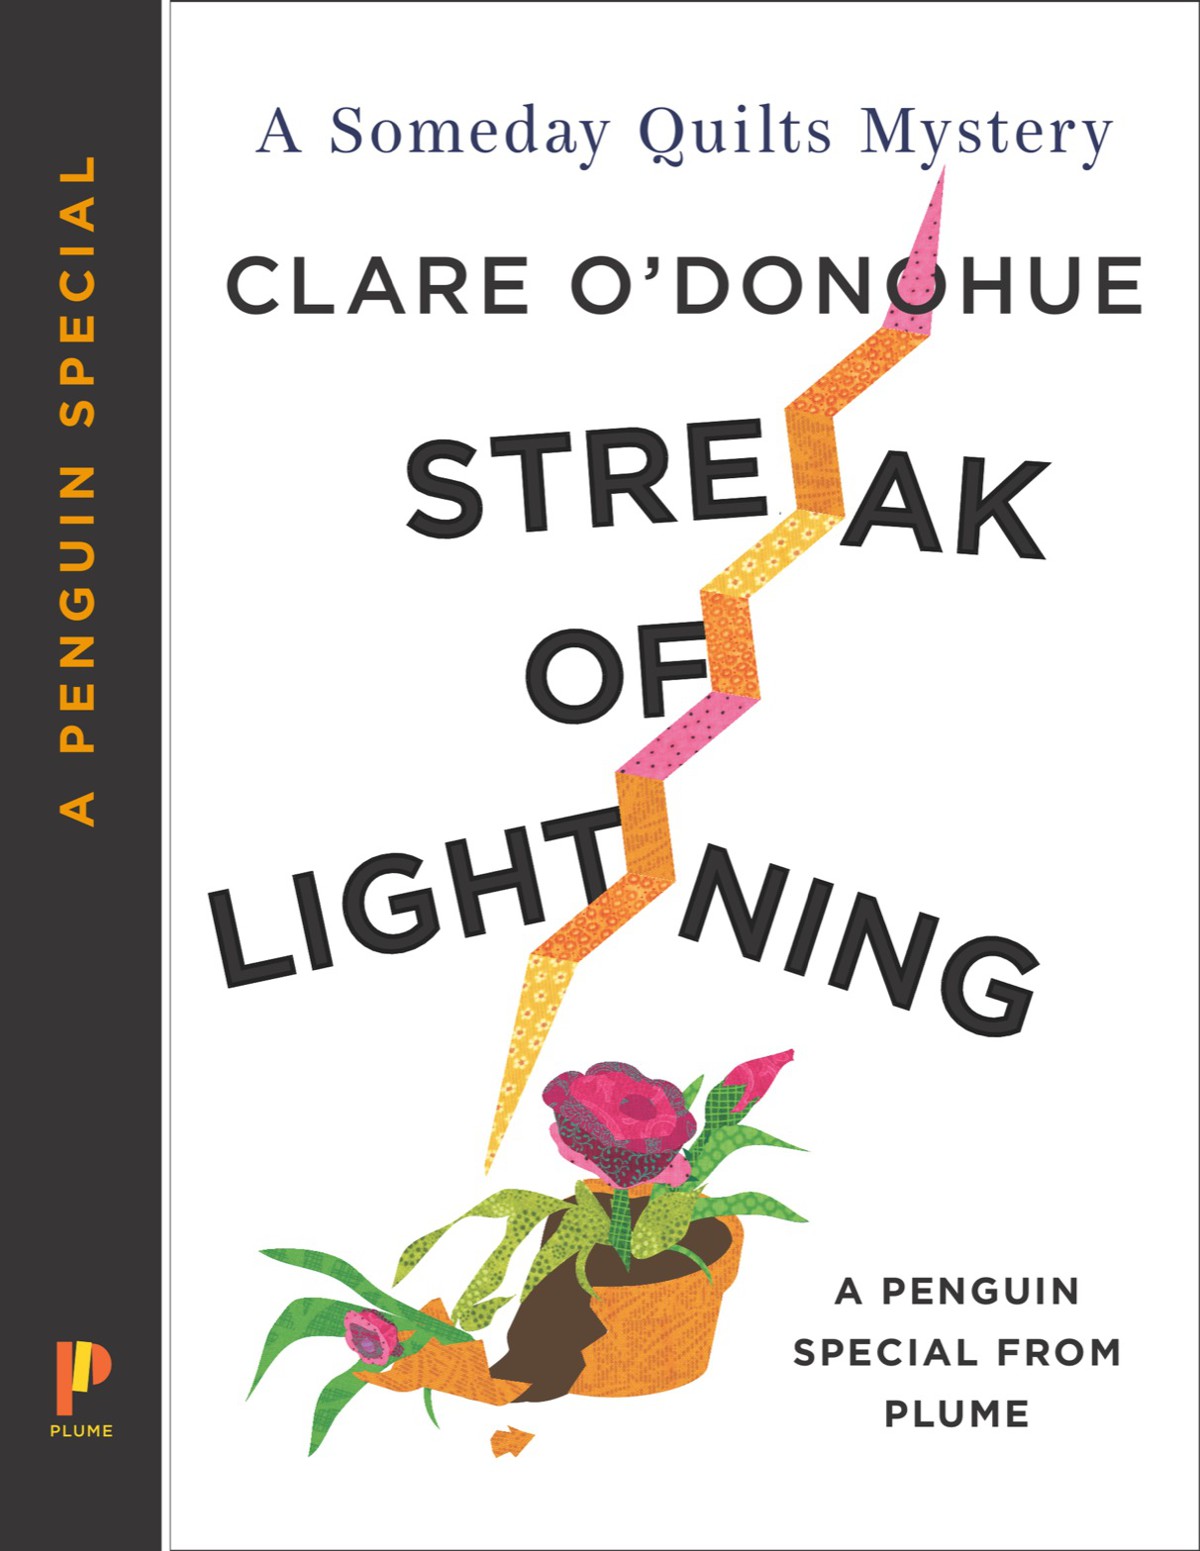 Streak of Lightning by Clare O'Donohue